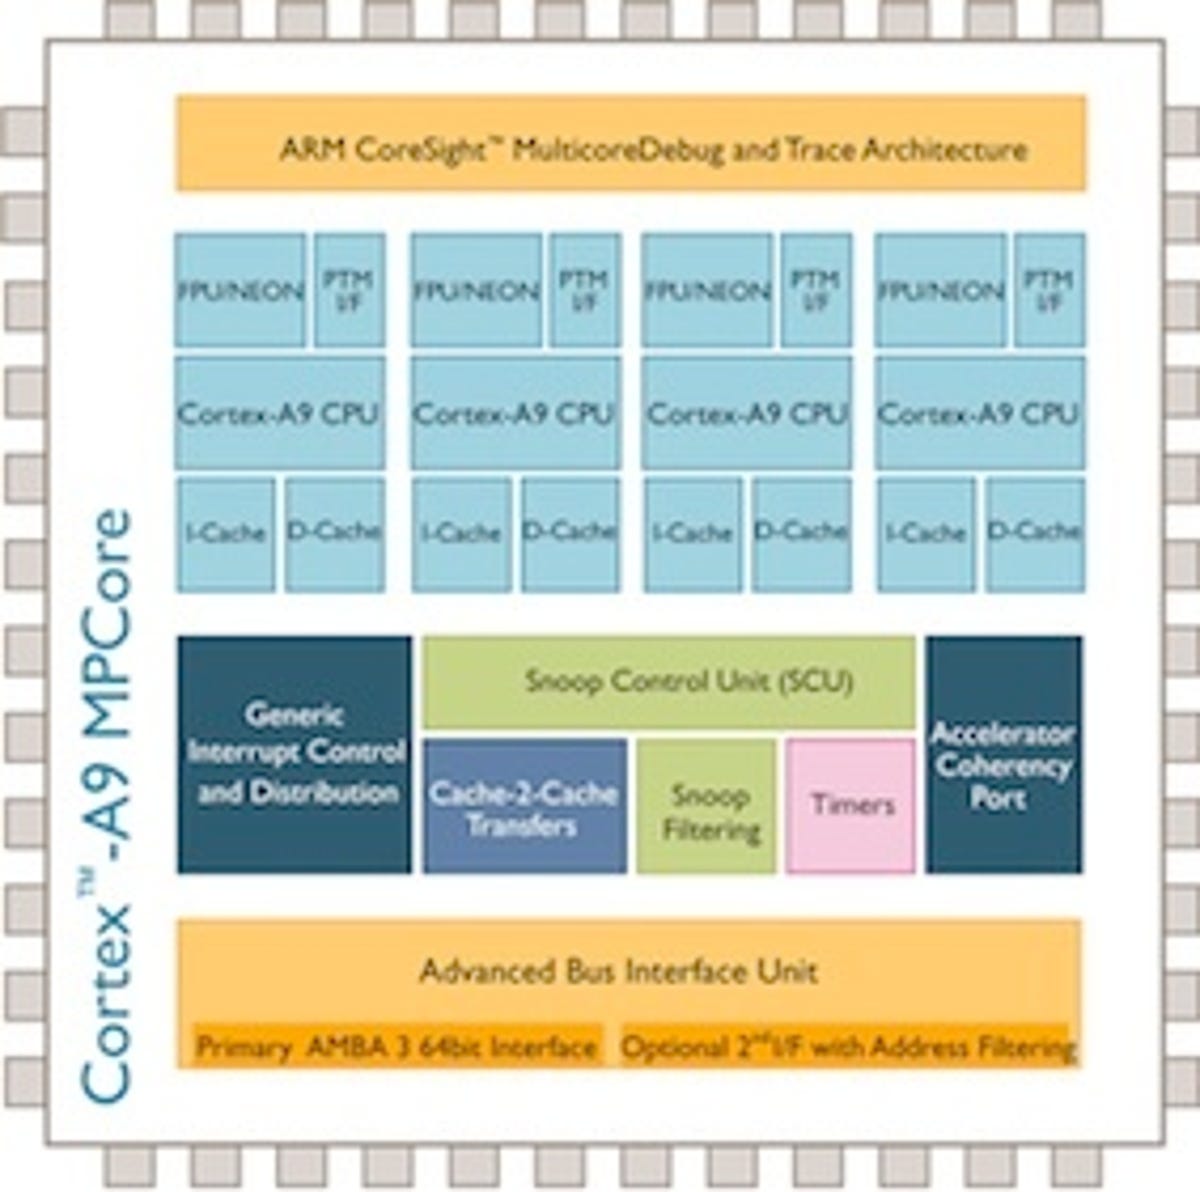 An ARM Cortex-A9 quad-core design--which the Apple A6 processor is based on.